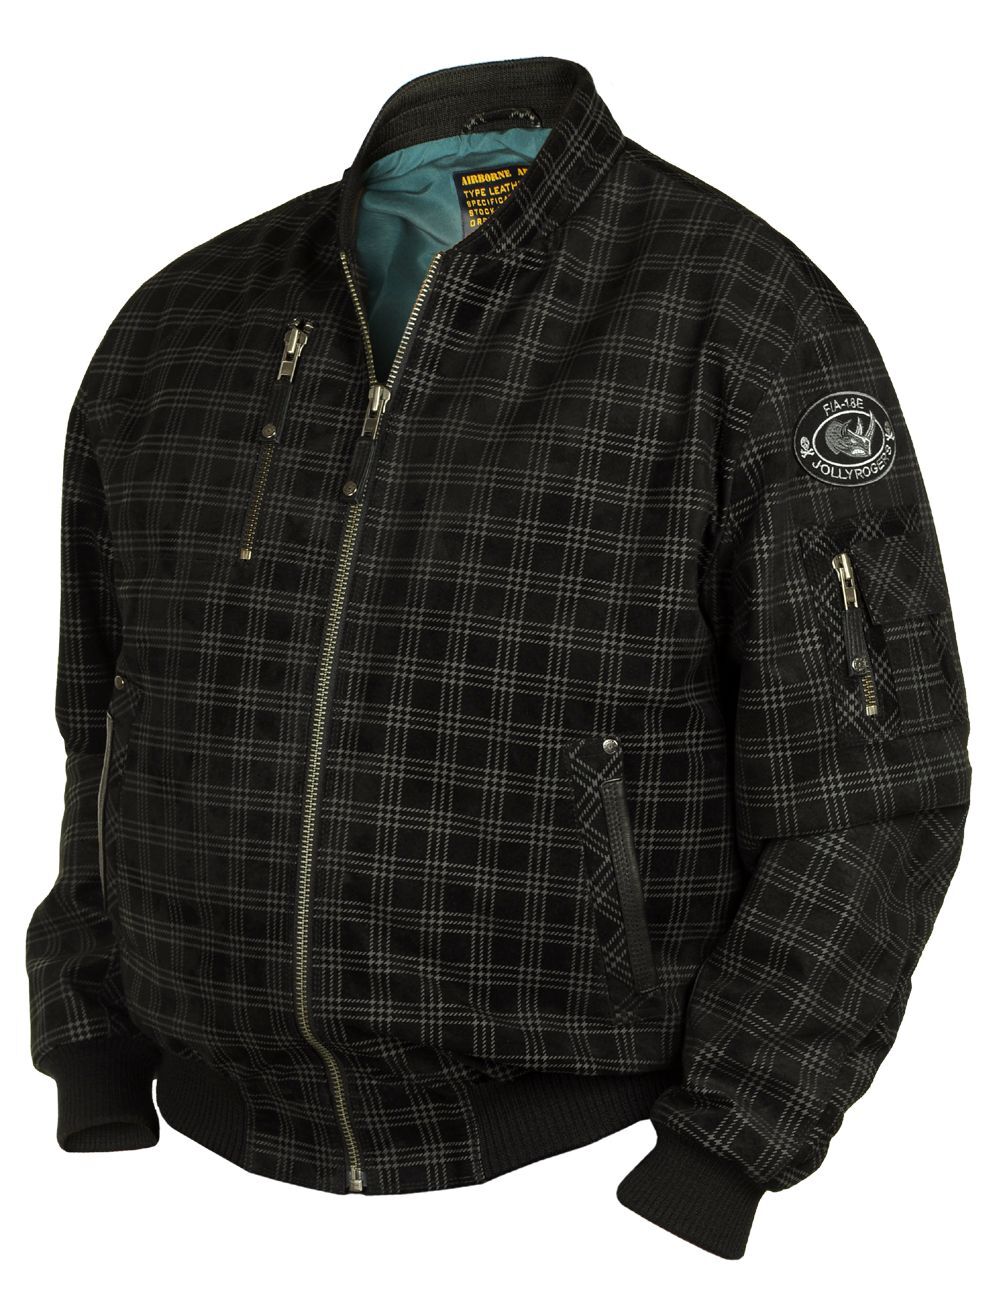 JOLLY ROGERS PRINTED SUEDE BOMBER LEATHER JACKET